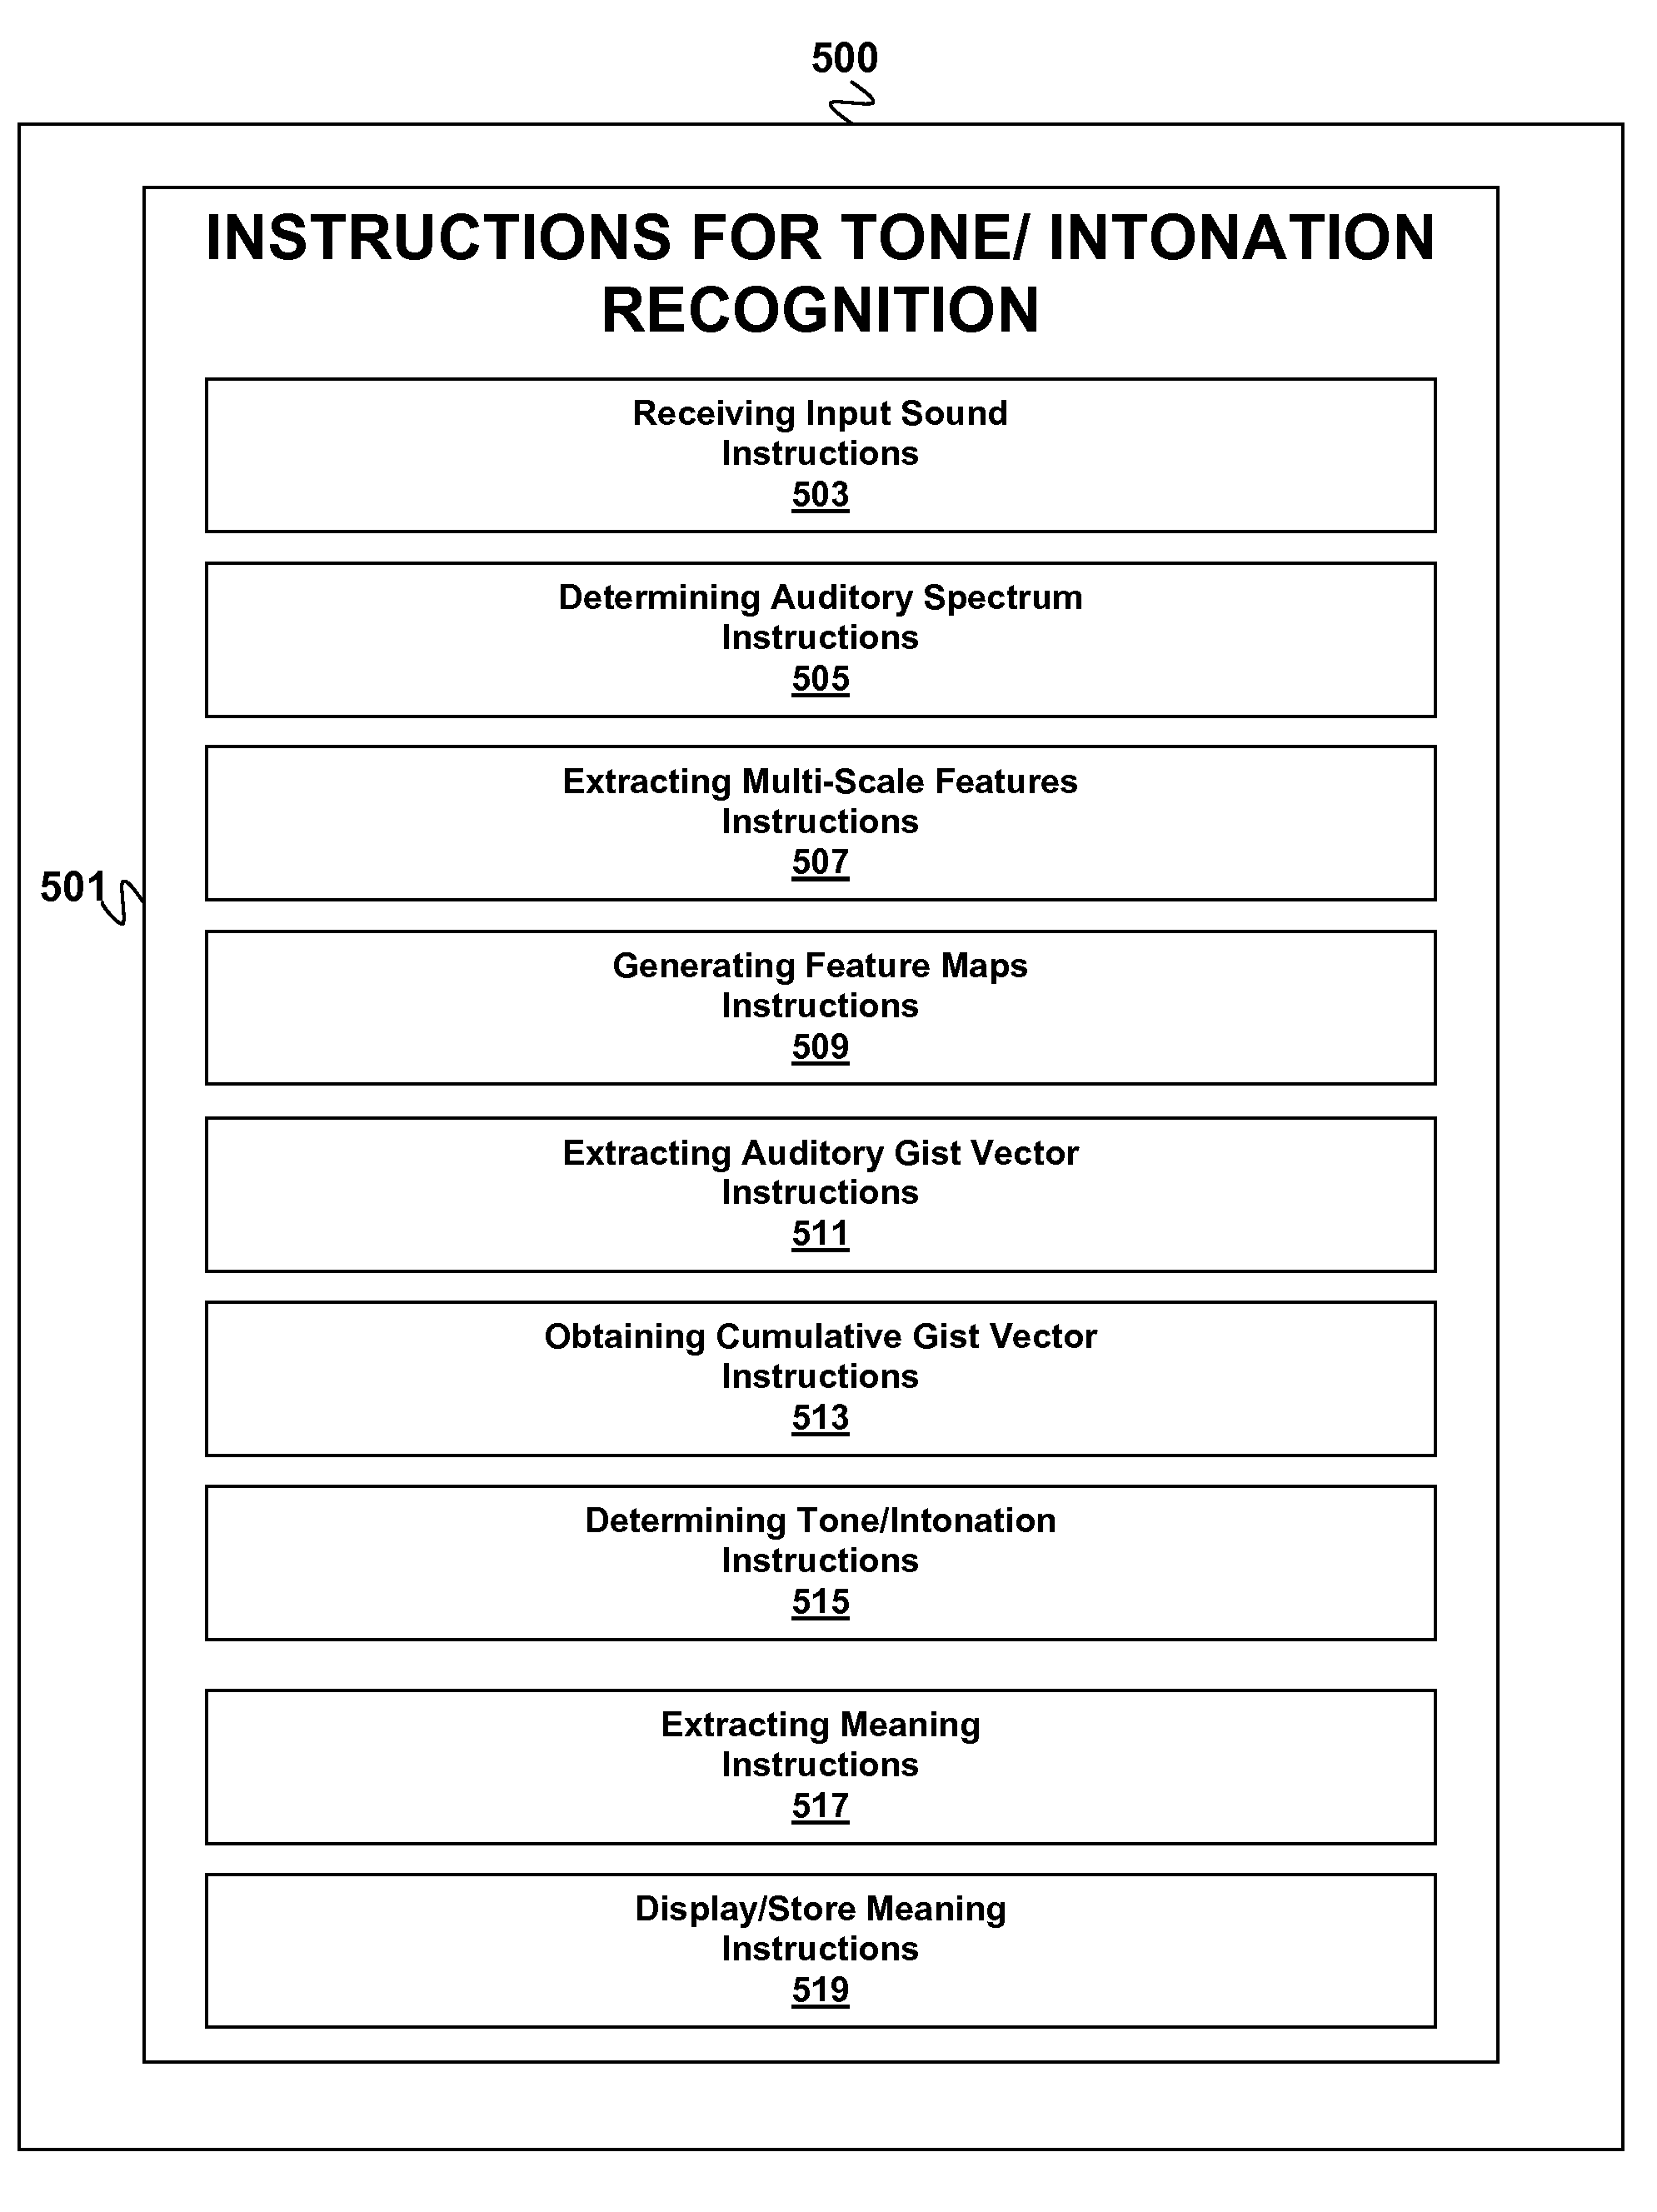 Method for tone/intonation recognition using auditory attention cues